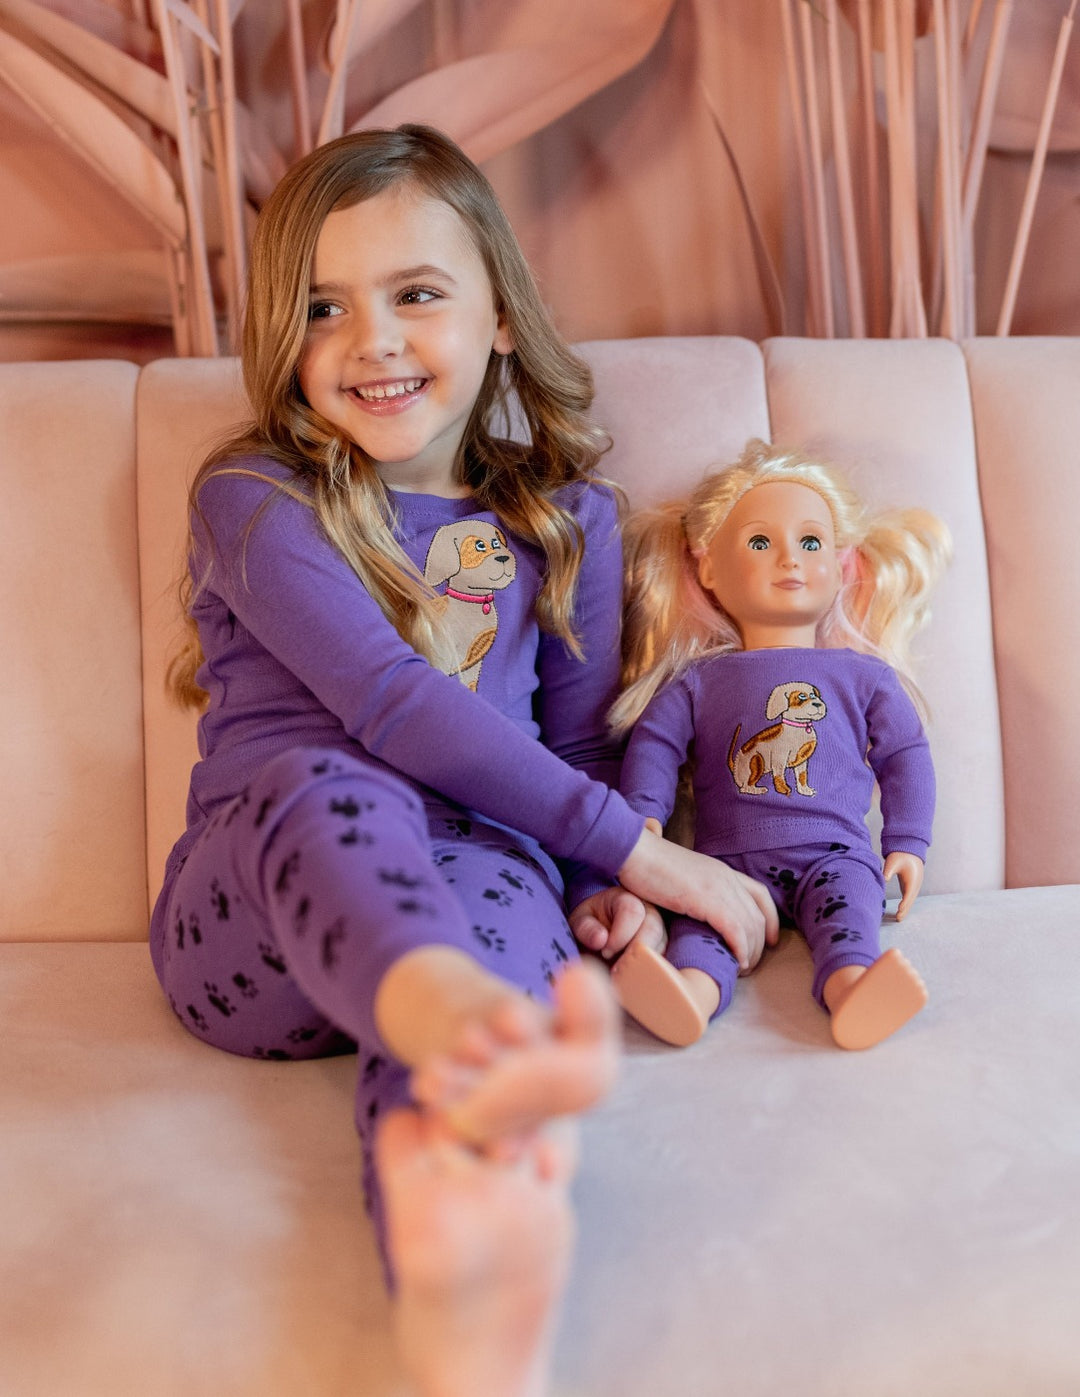 Matching Girl and Doll Purple Paw Print Pajamas – Leveret Clothing